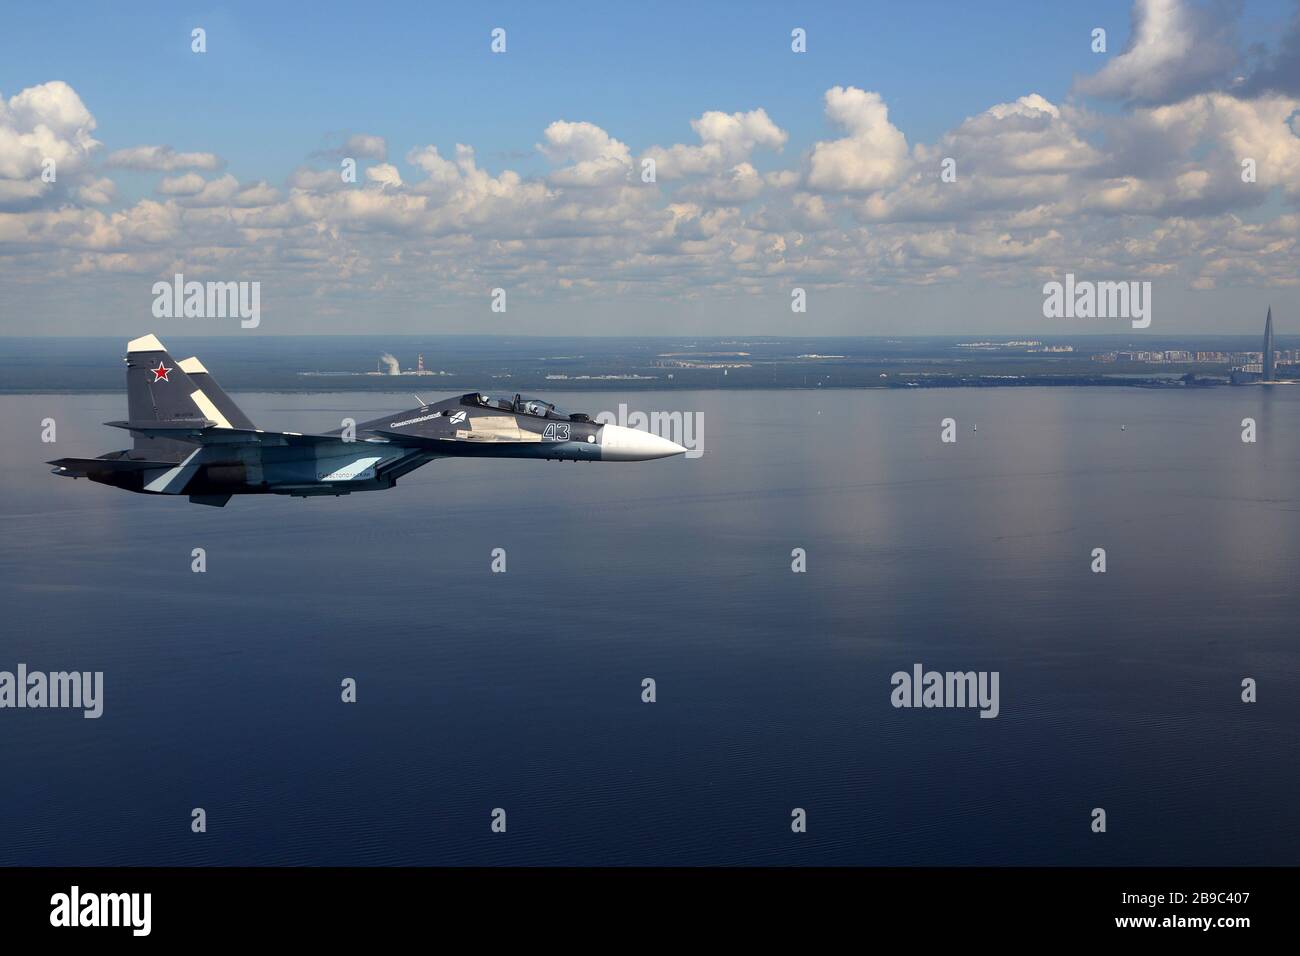 Su-30SM jet fighter of the Russian Navy flying over Gulf of Finland, Russia. Stock Photo